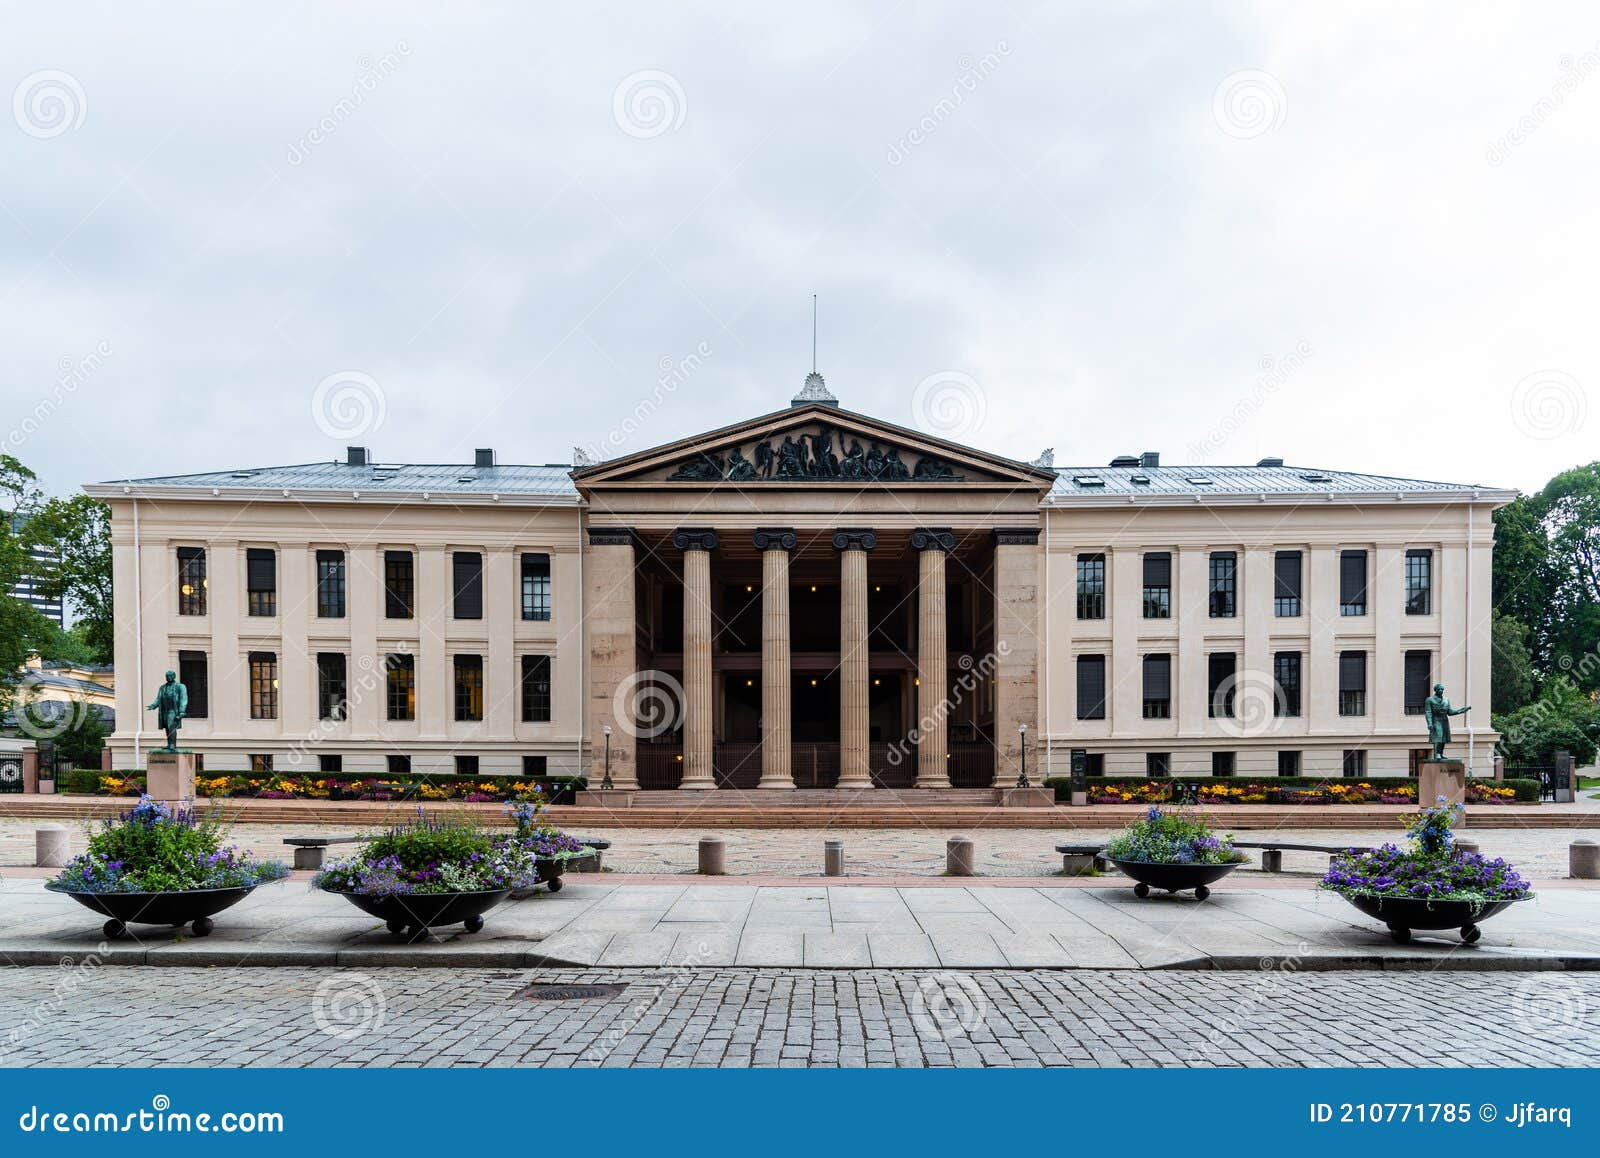 Exterior View of University of Oslo Building Editorial Image - Image of ...